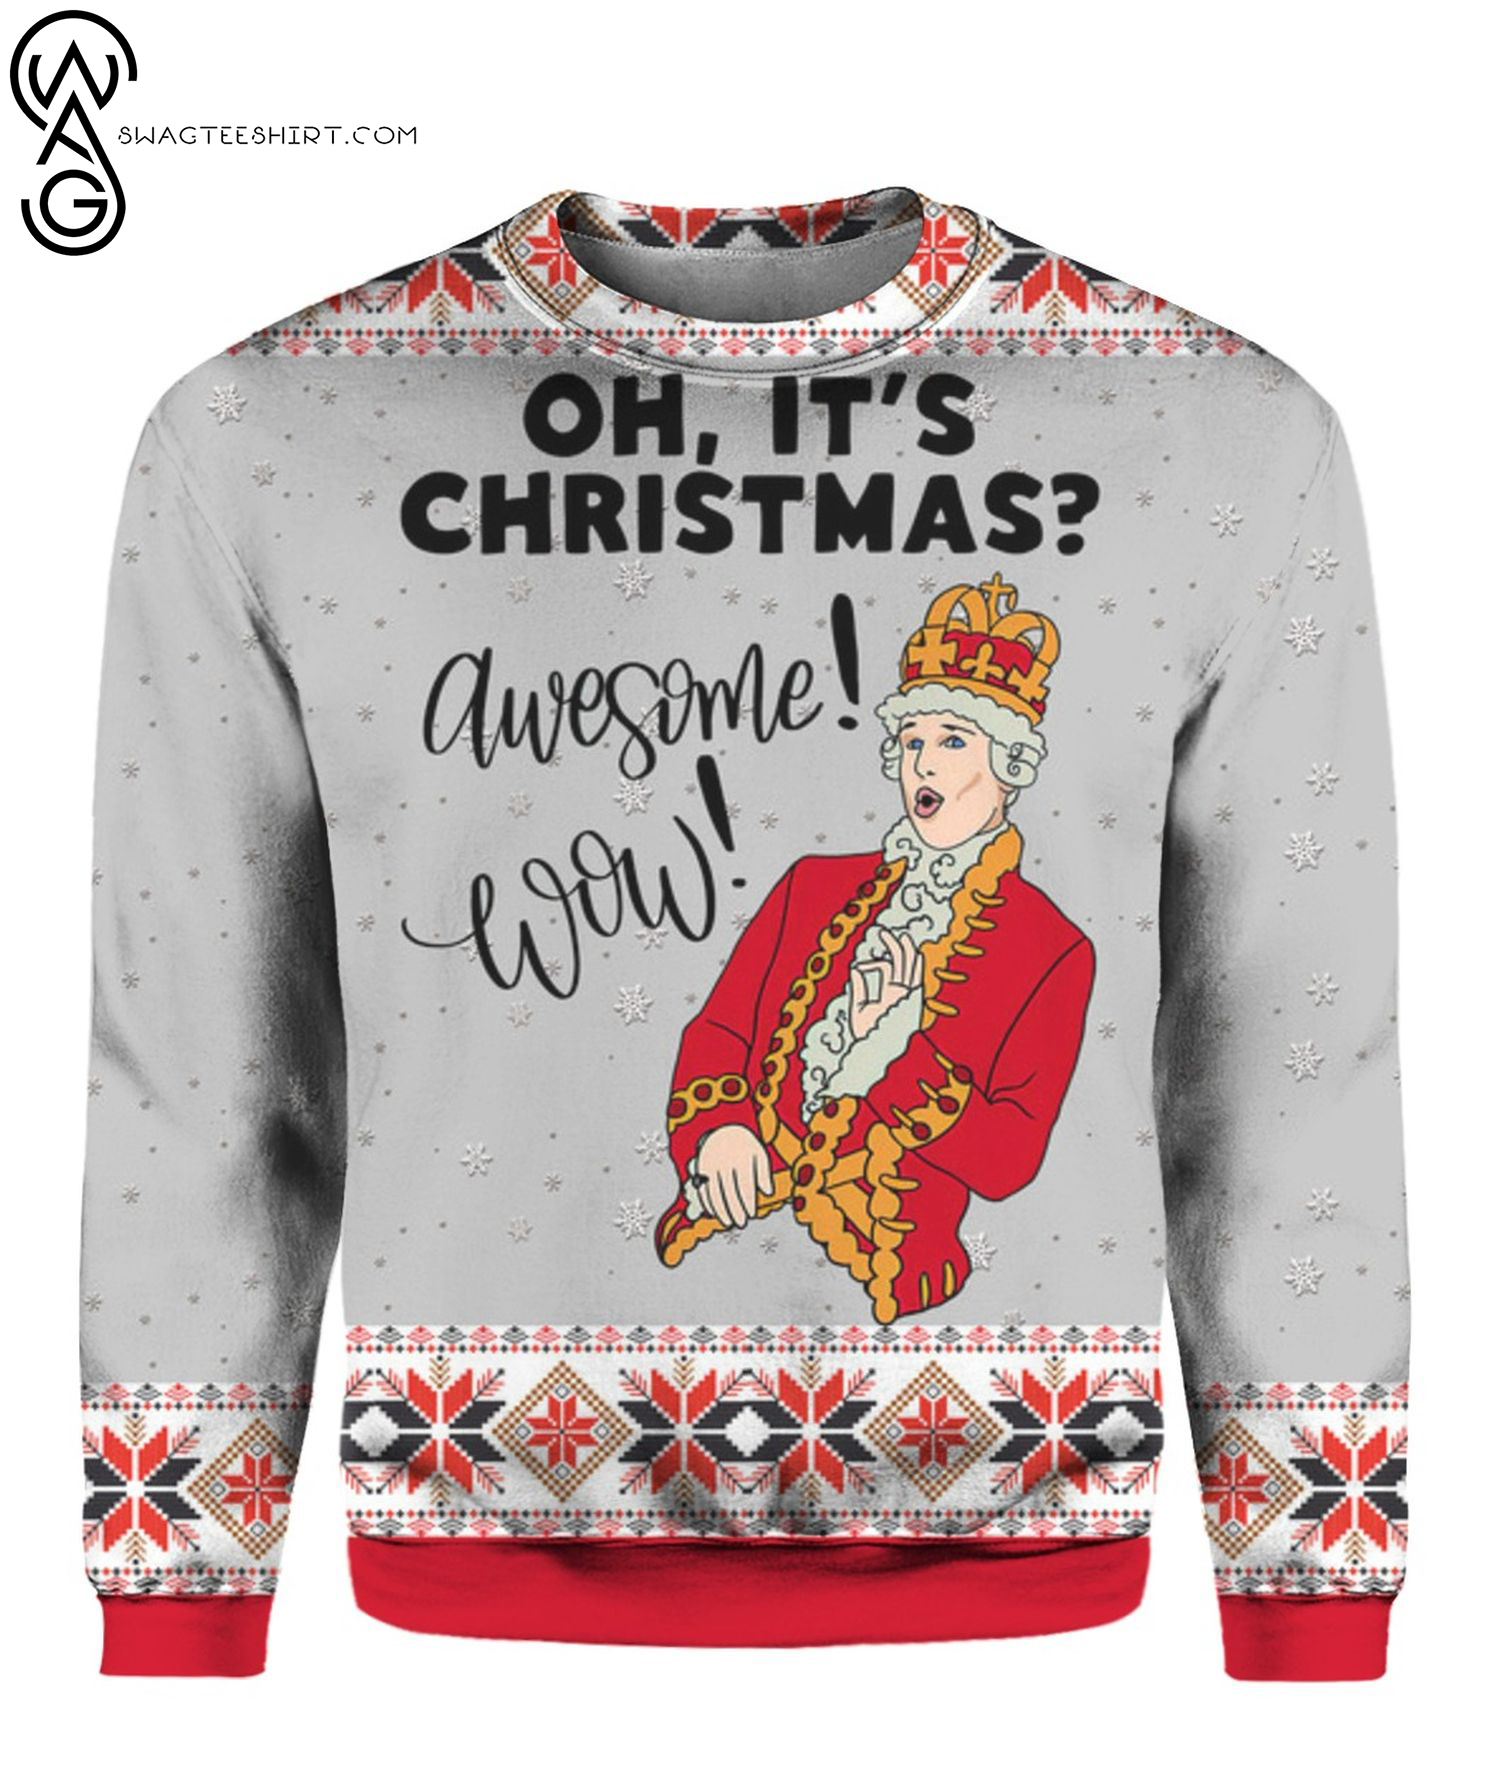 Hamilton King George Musical Oh Its Christmas Awesome Wow Full Print Ugly Christmas Sweater